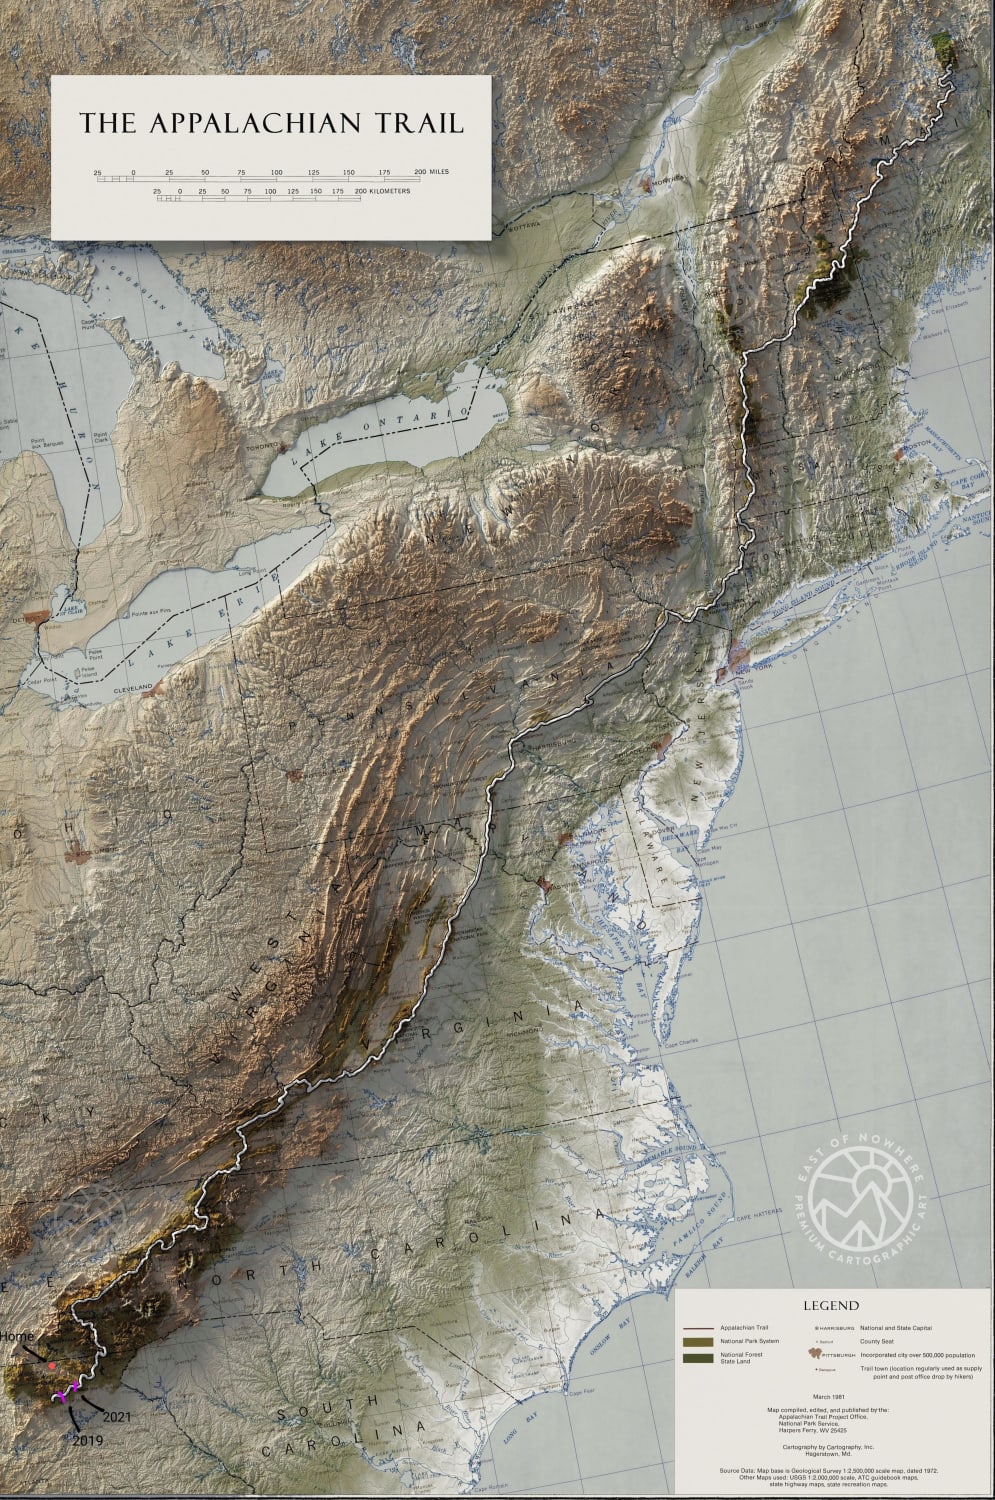 This map really helps visualize how long the Appalachian Trail is.